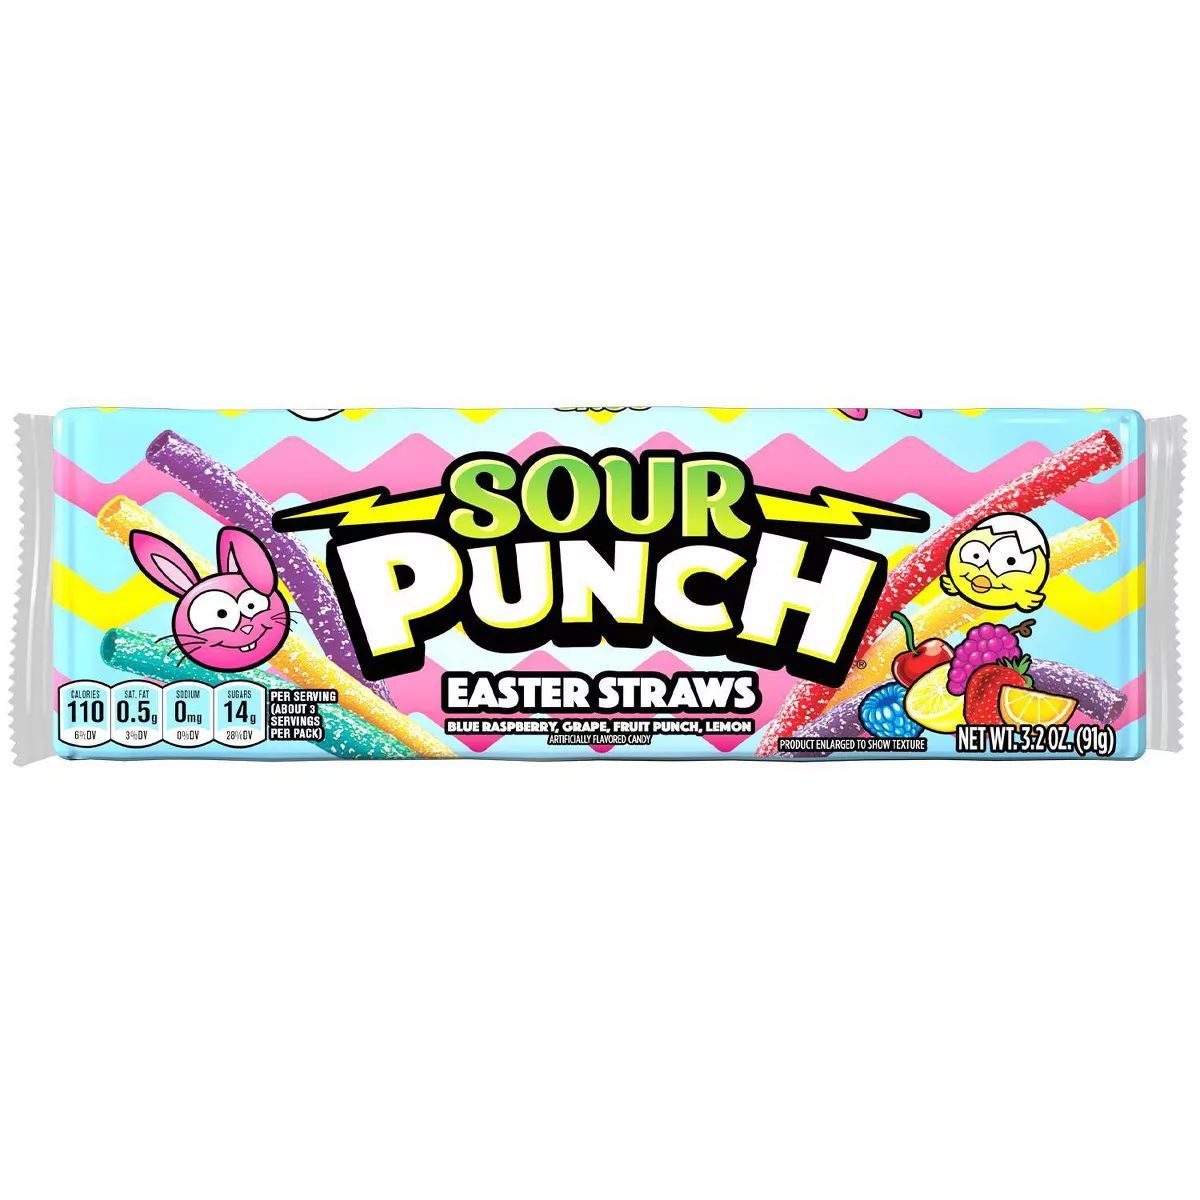 Sour Punch Easter Straws Tray - 3.2oz | Target